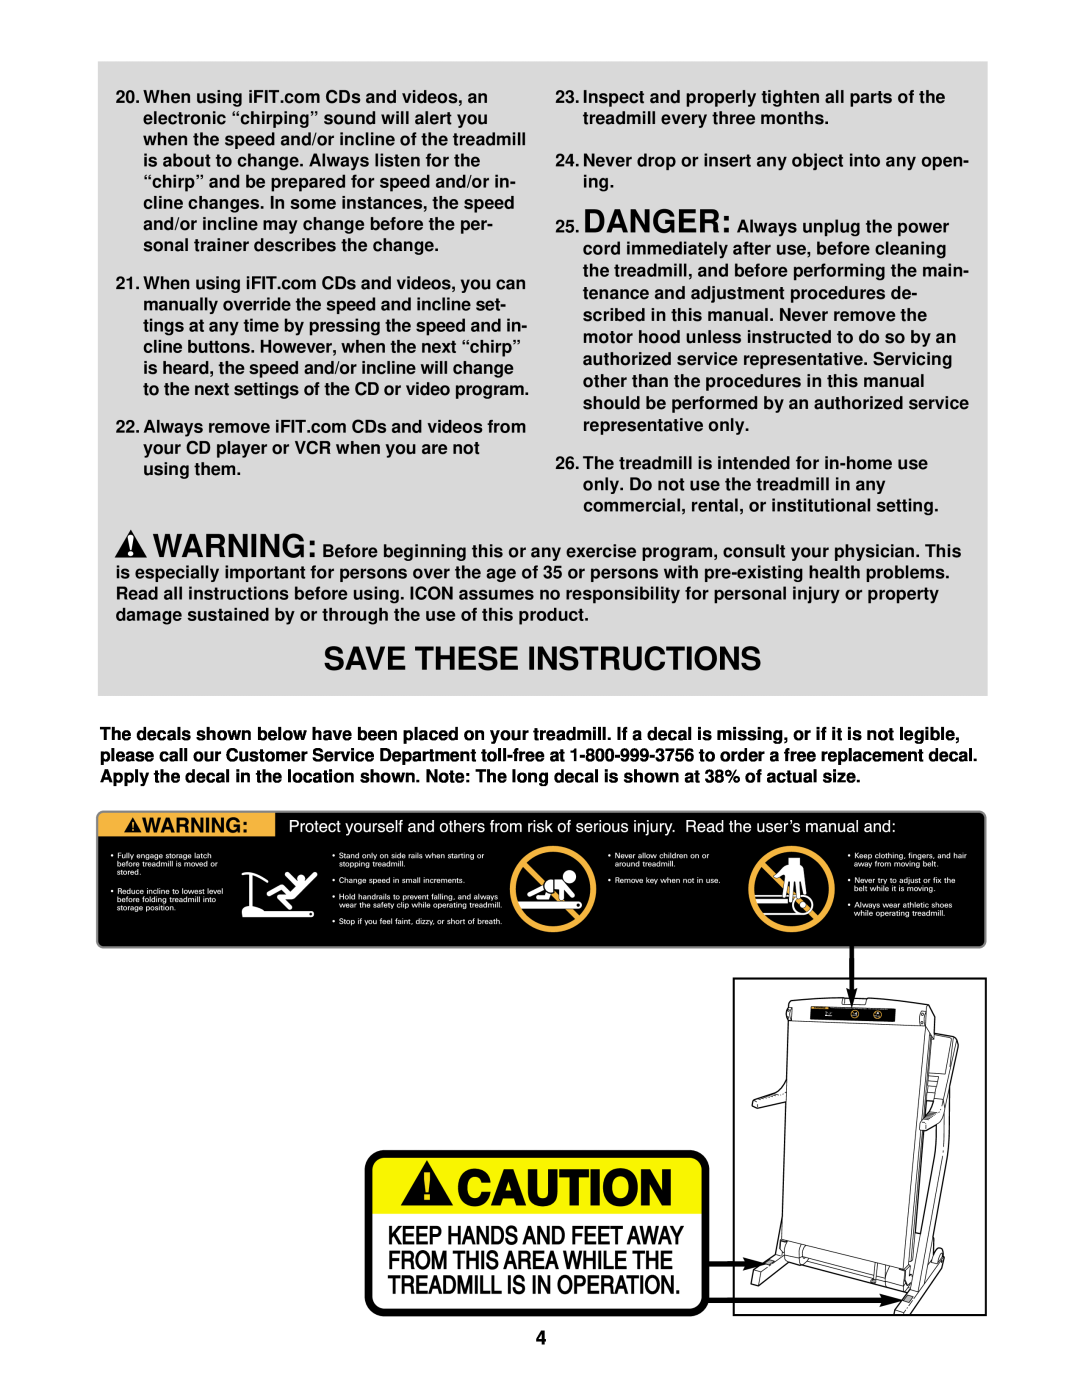 Healthrider HRTL14910 manual Save These Instructions, Never drop or insert any object into any open- ing 